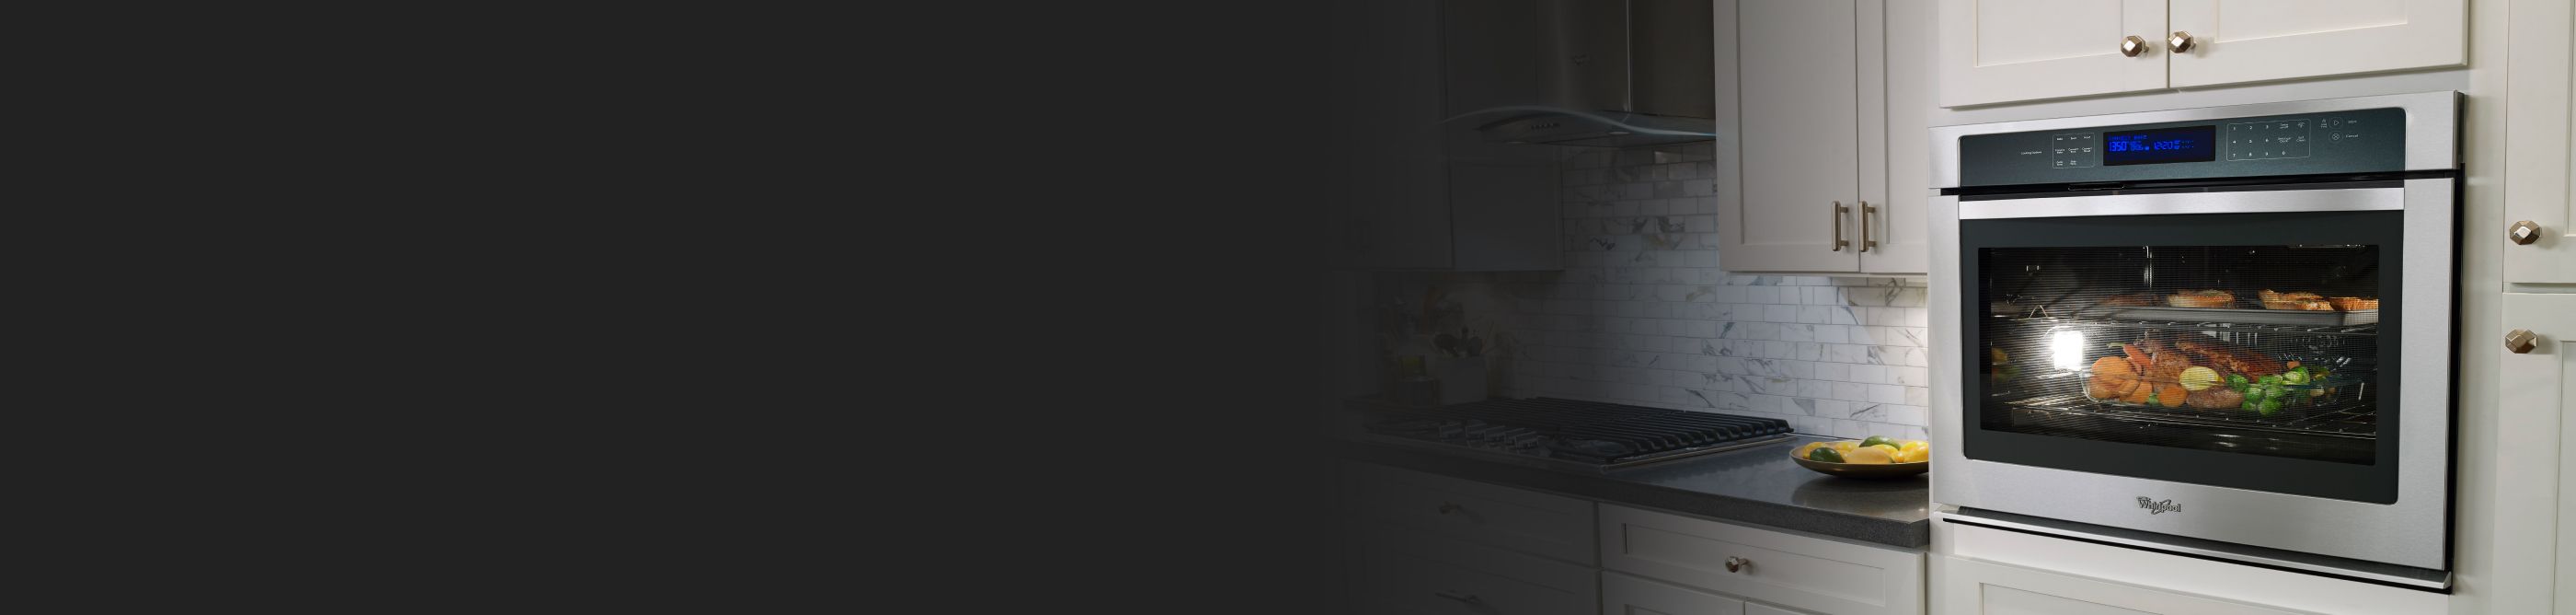 Whirlpool® wall oven